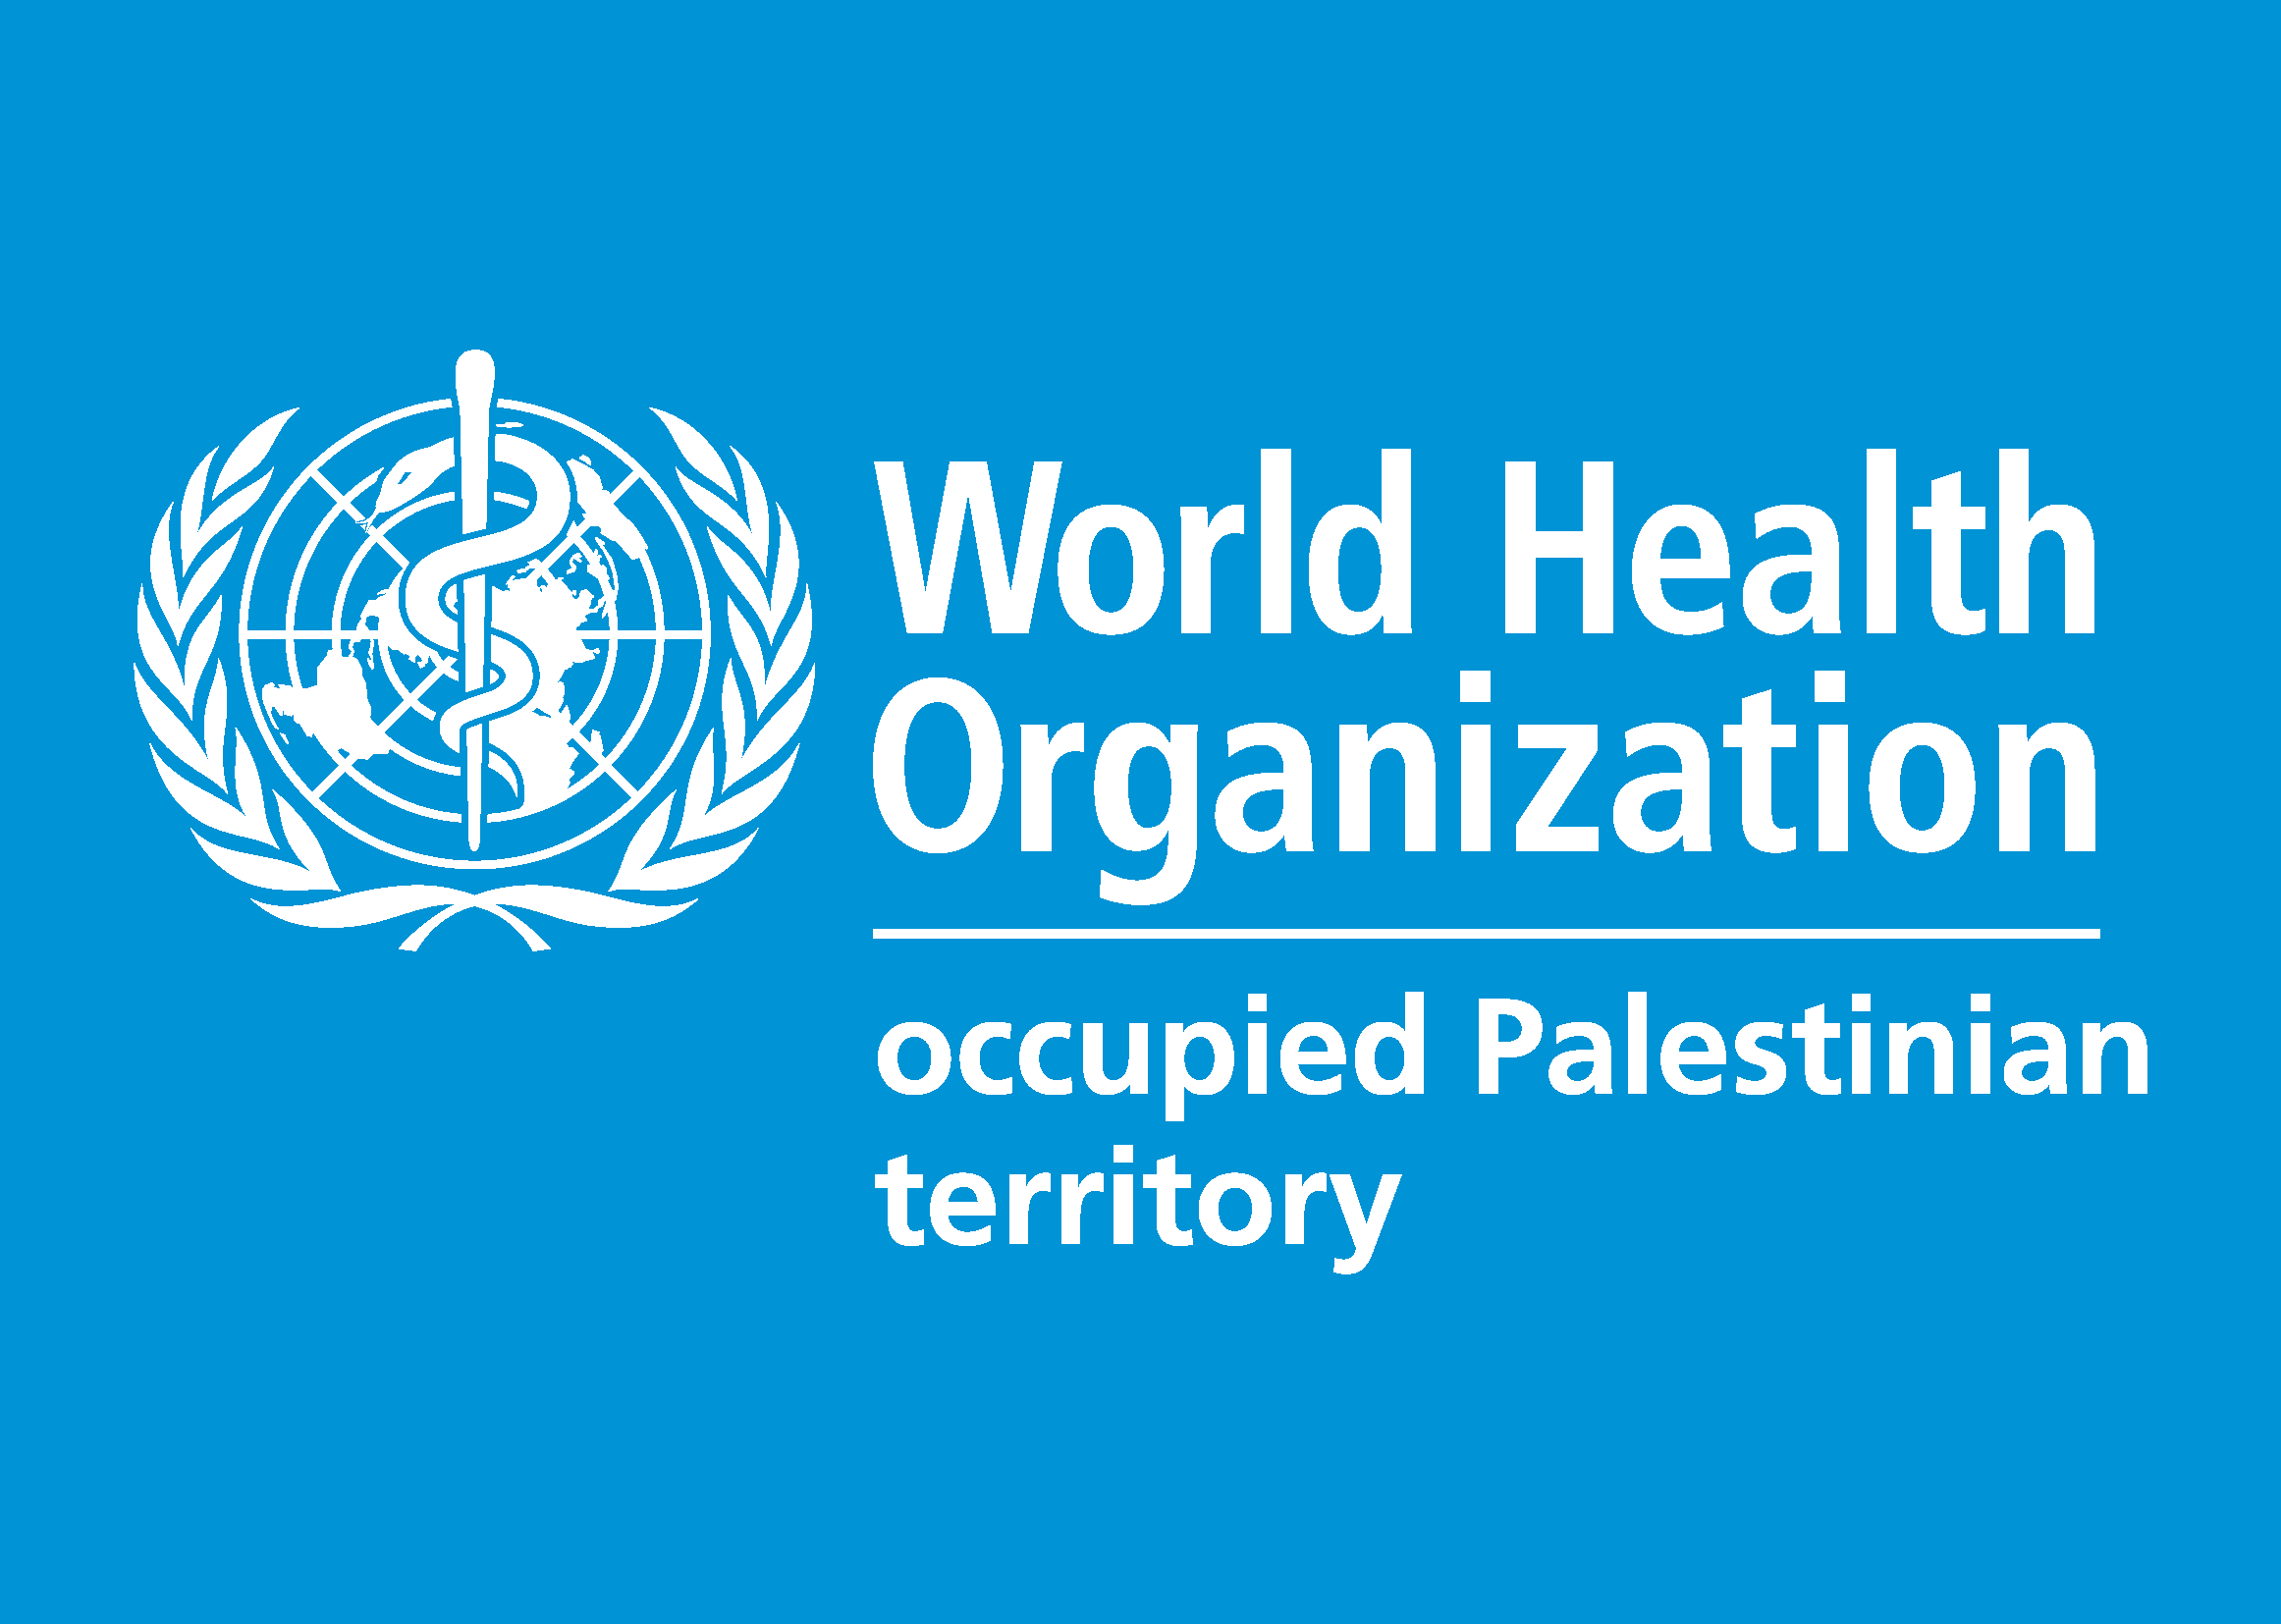 France and the UN join hands to strengthen maternal and neonatal health services in the Gaza Strip and the West Bank